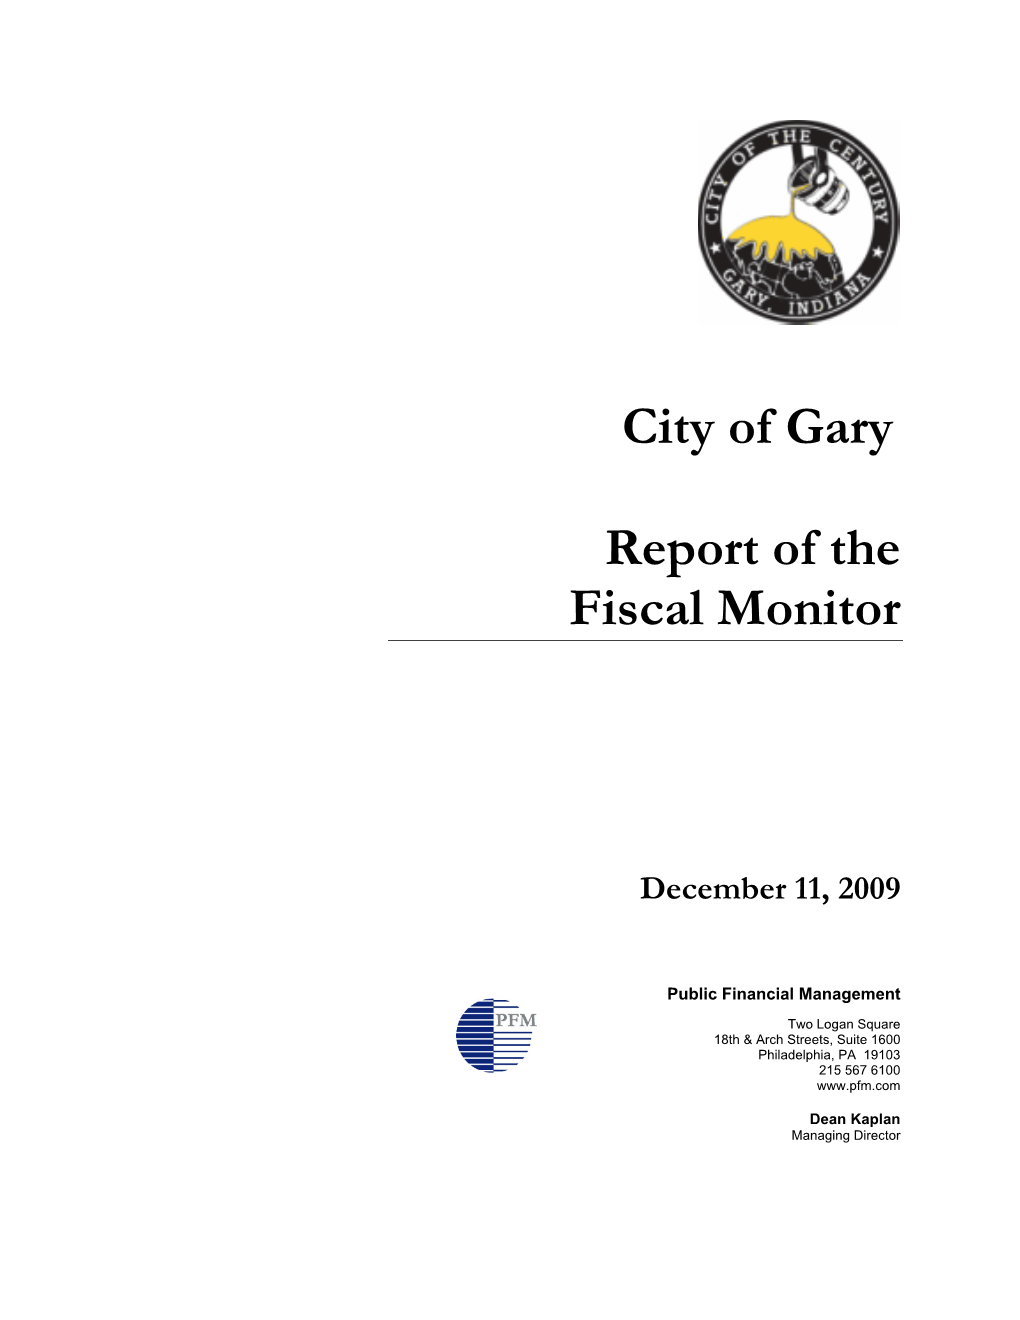 City of Gary Report of the Fiscal Monitor